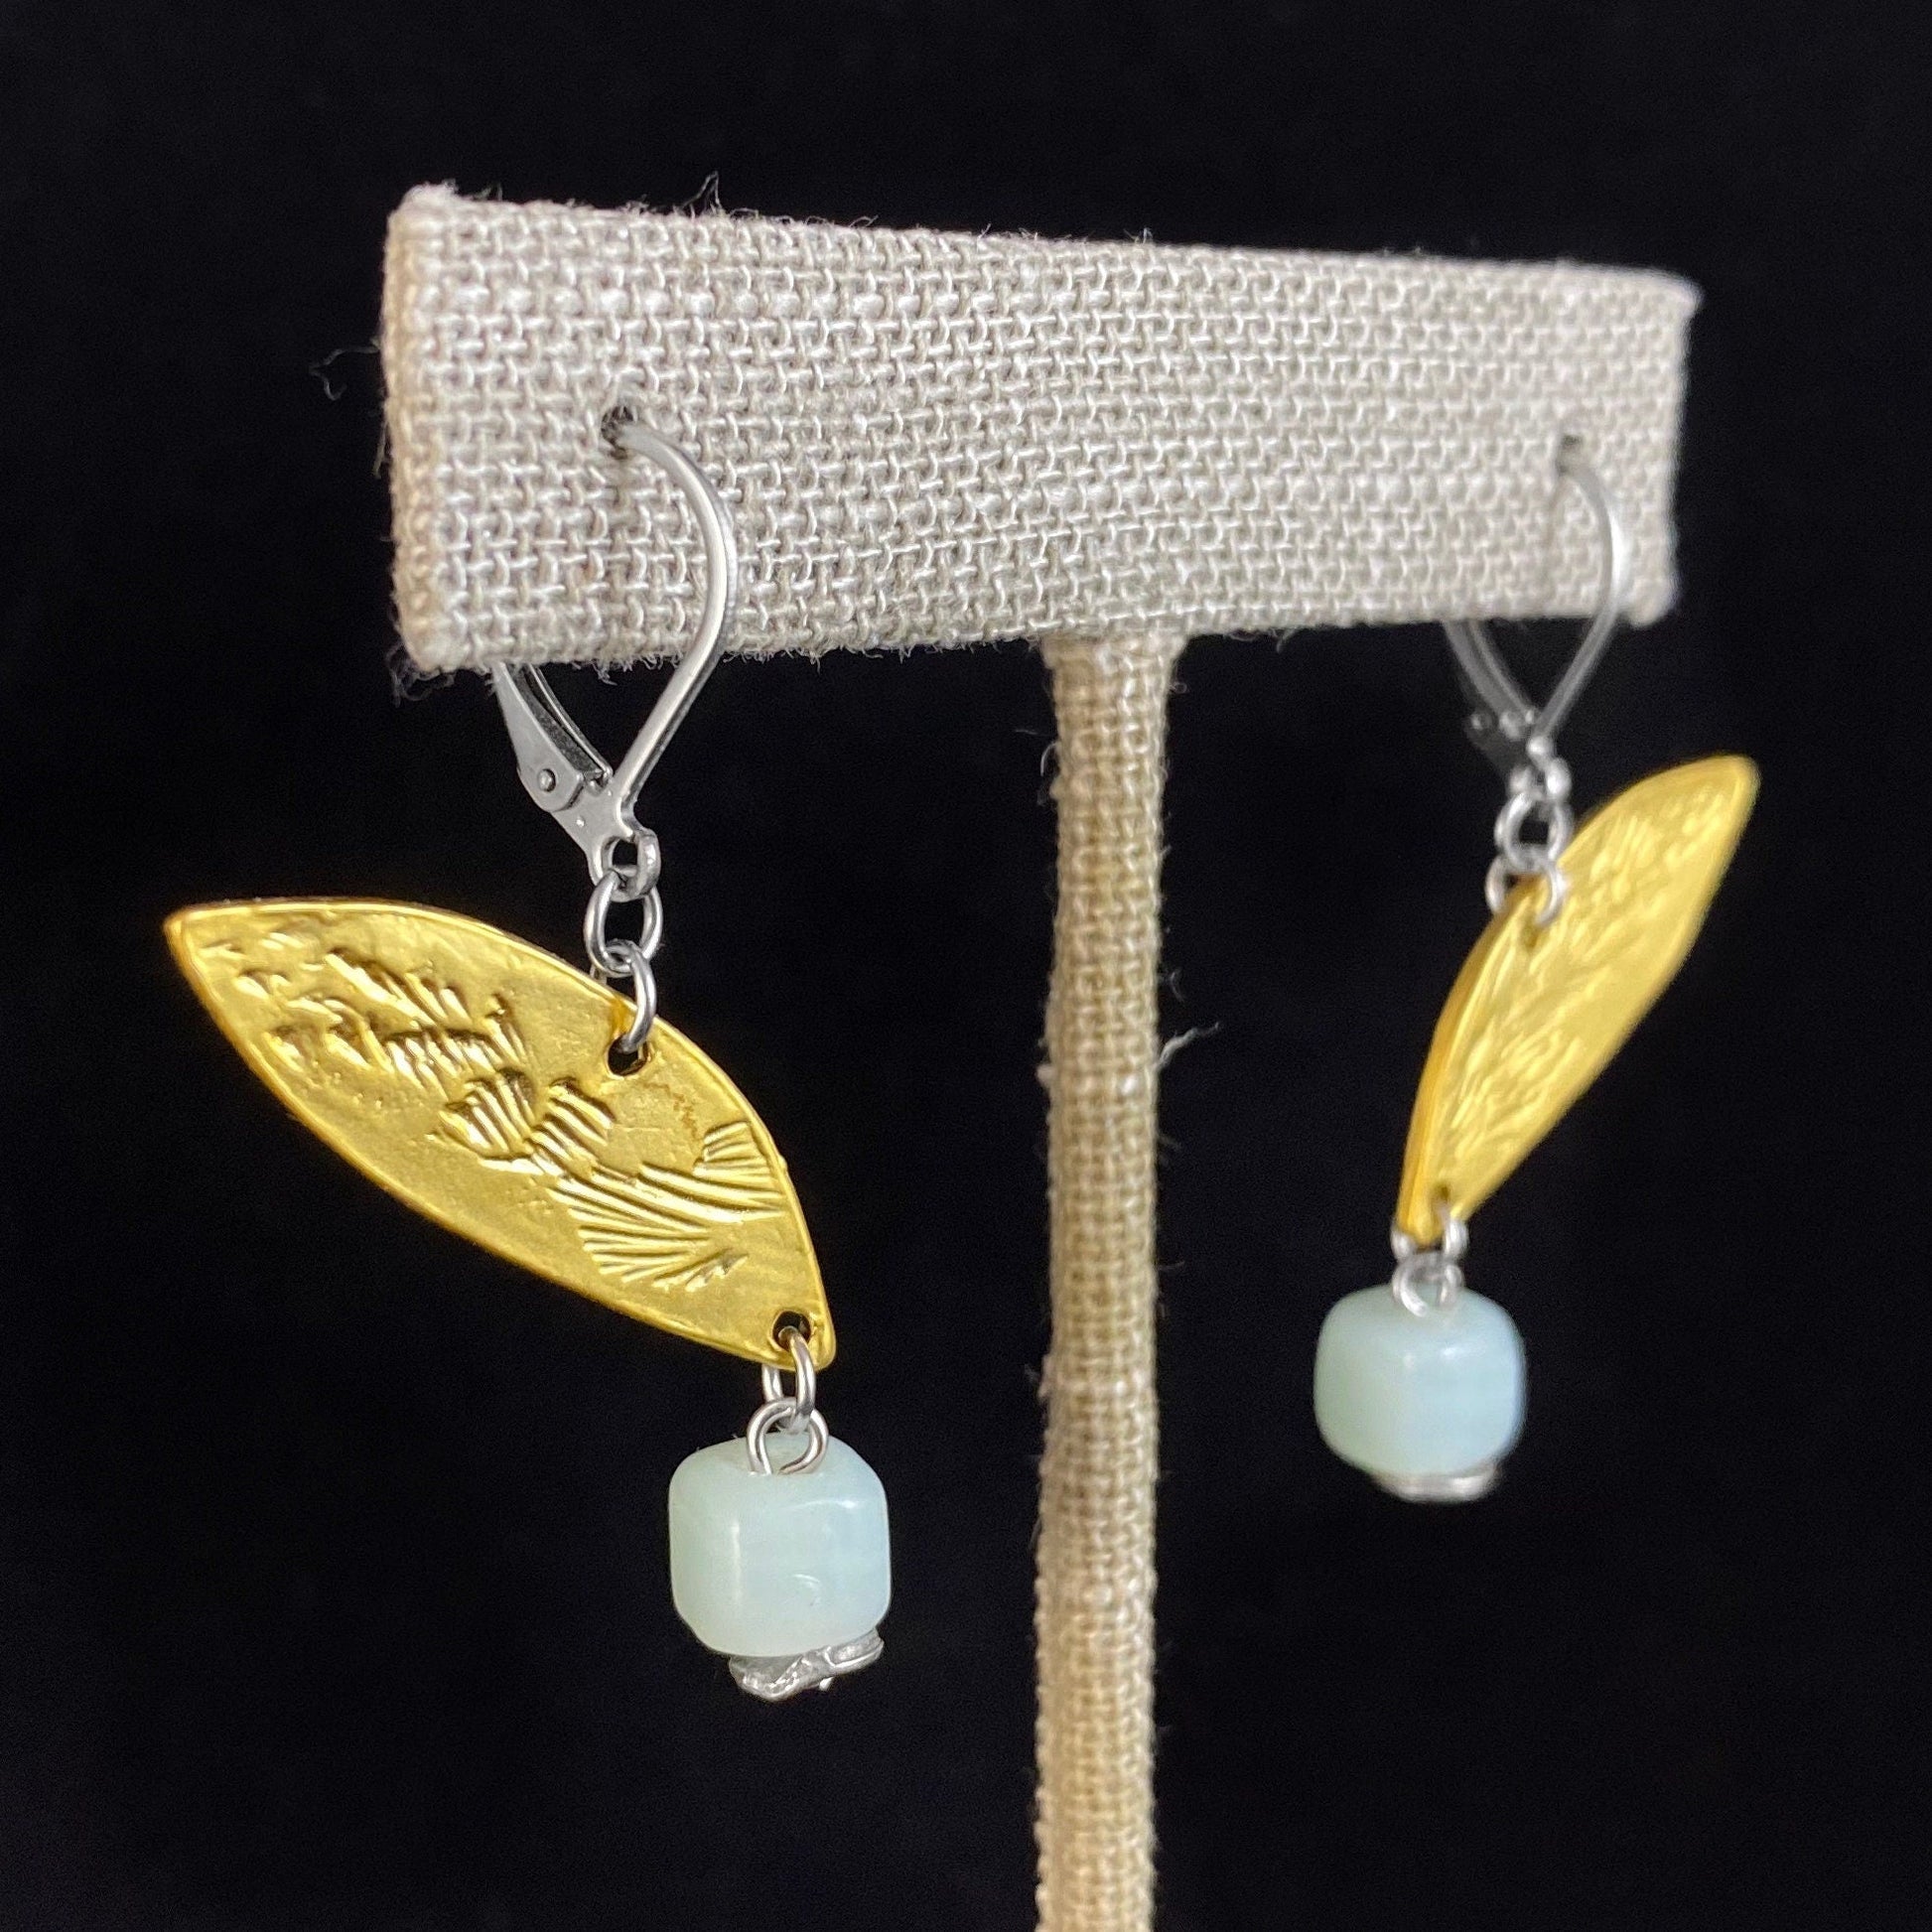 Gold Leaf Earrings with Pale Green Bead - Handmade in Canada, Anne-Marie Chagnon Jewelry